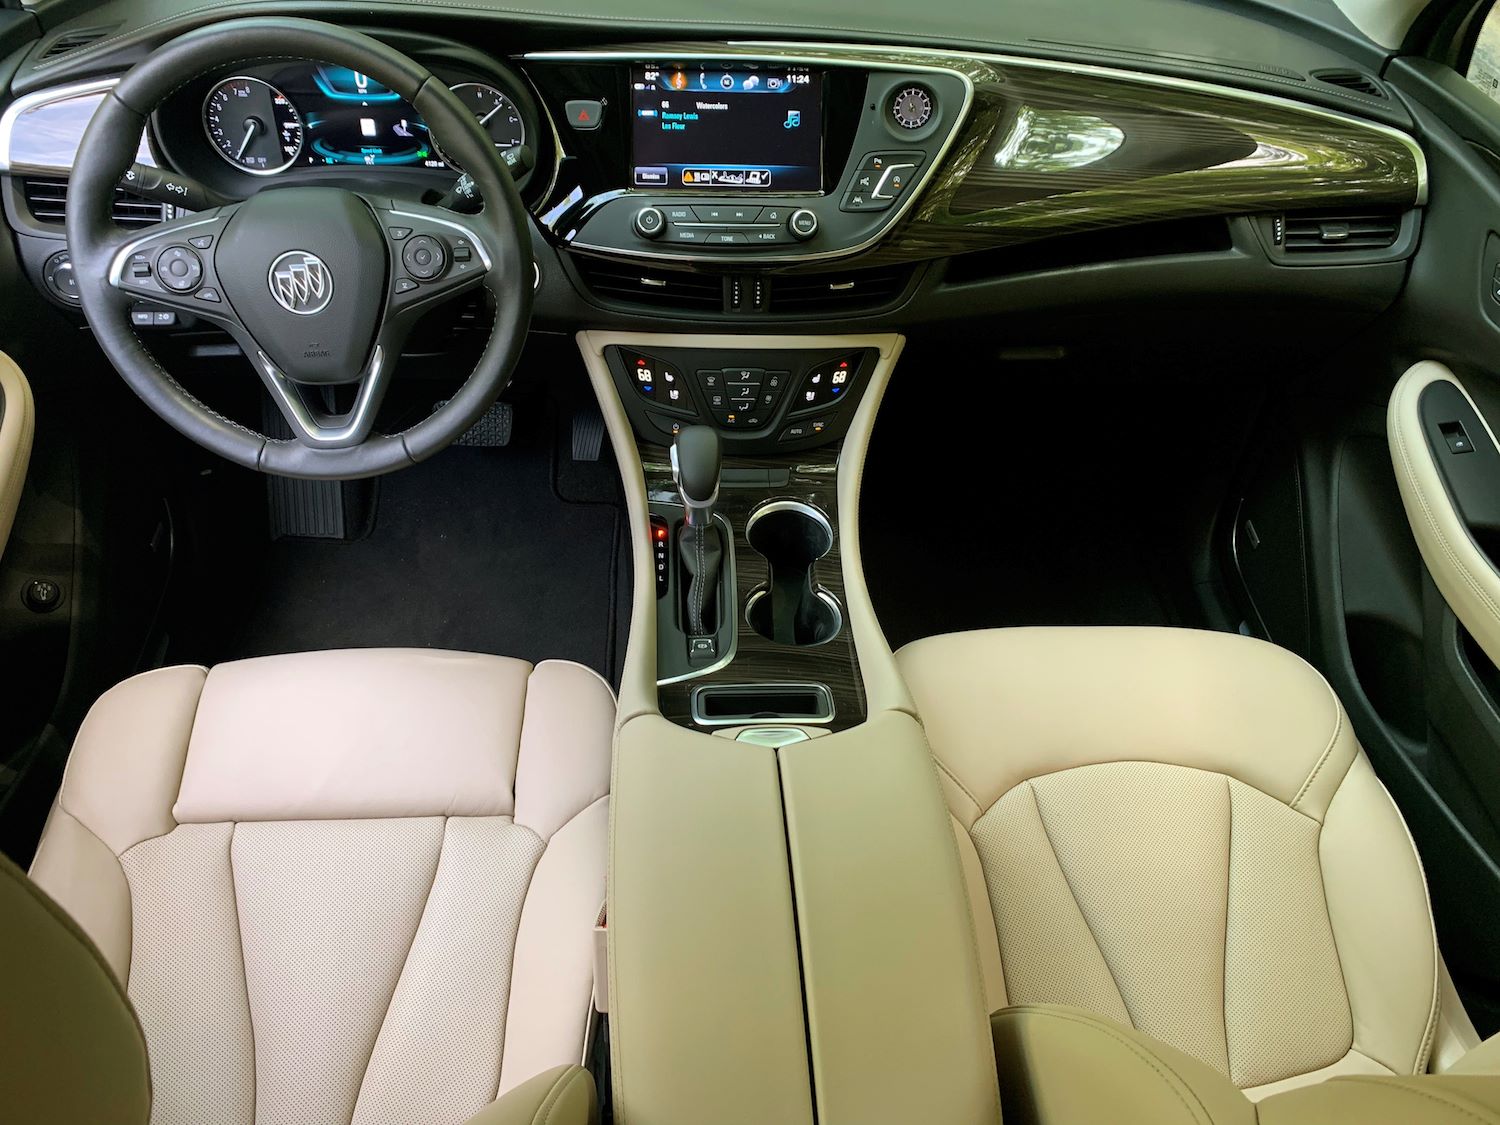 2019 Buick Envision dashboard